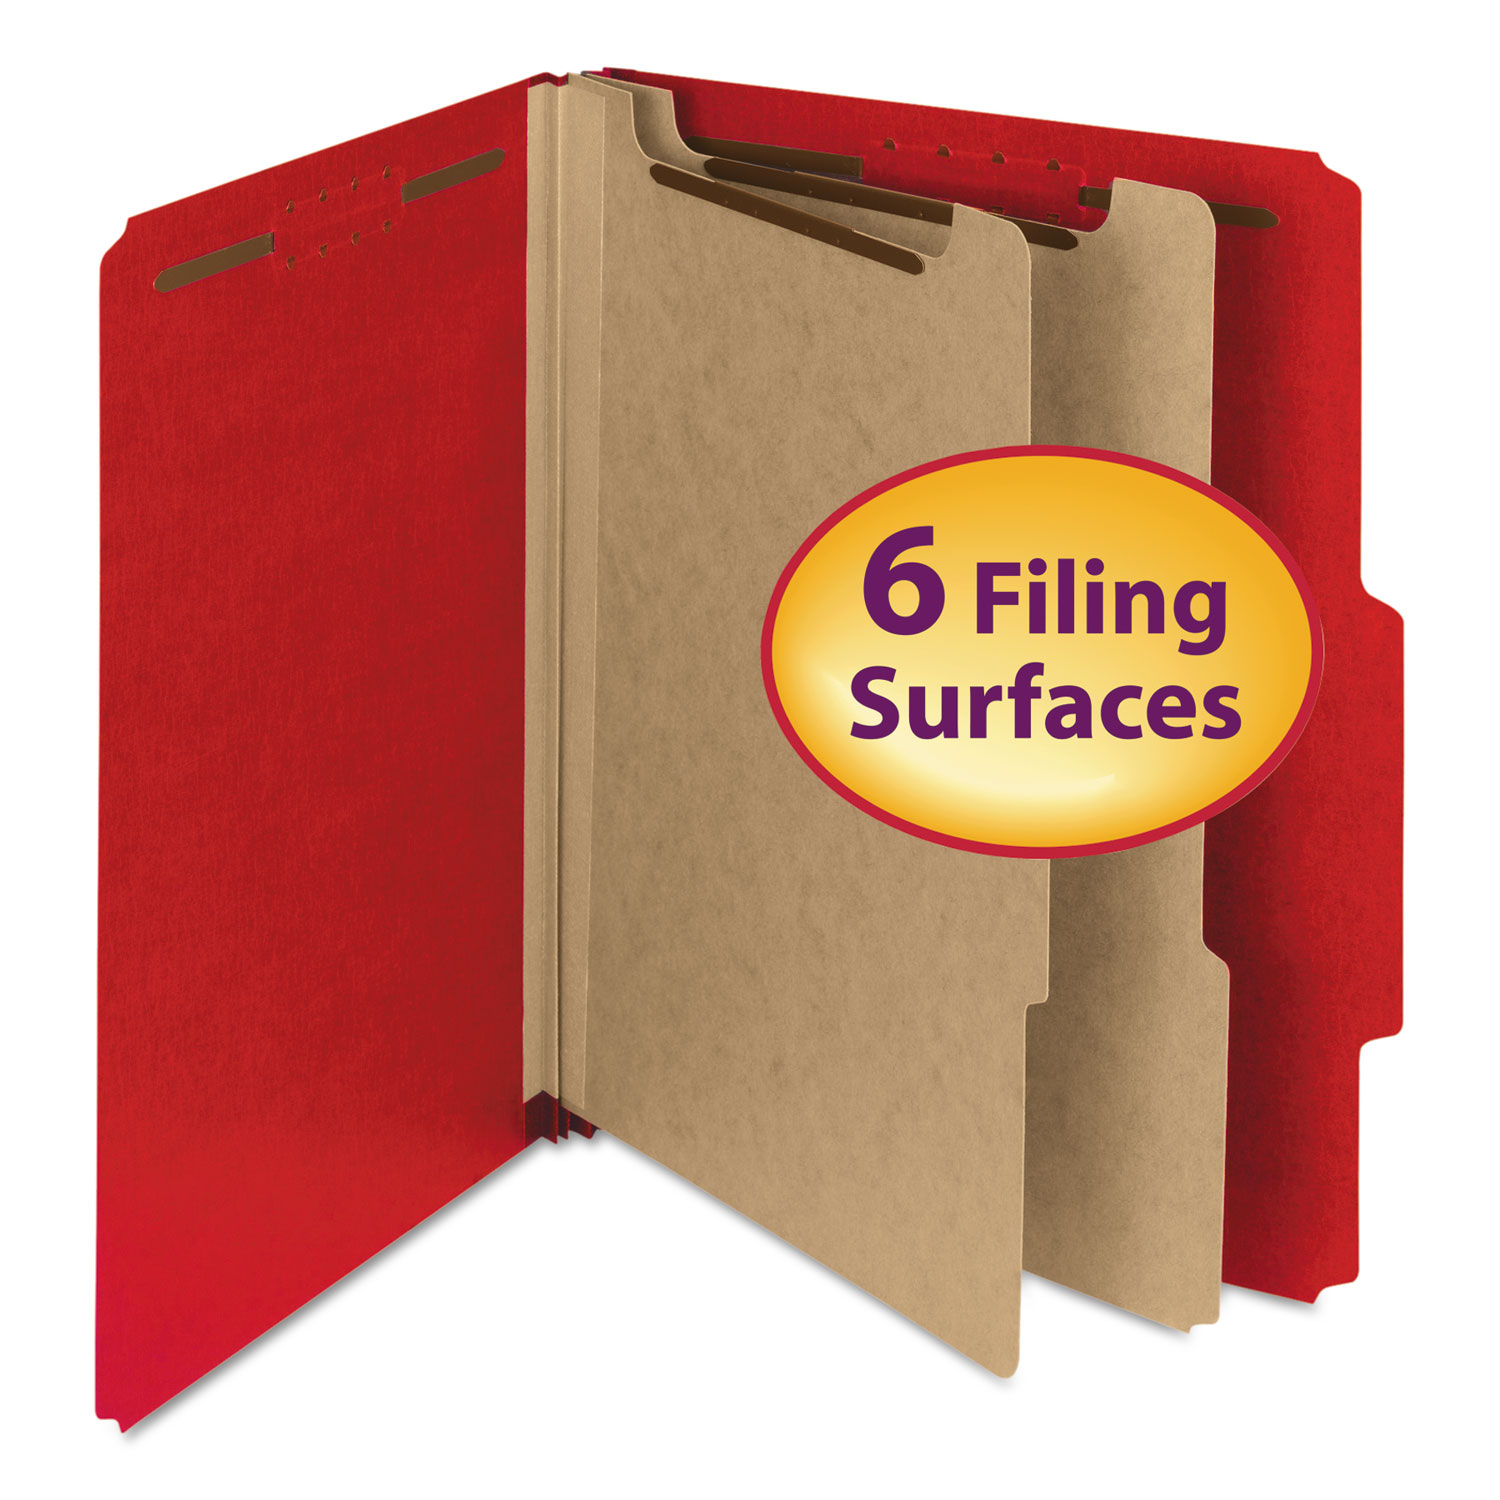  Smead 14061 100% Recycled Pressboard Classification Folders, 2 Dividers, Letter Size, Bright Red, 10/Box (SMD14061) 